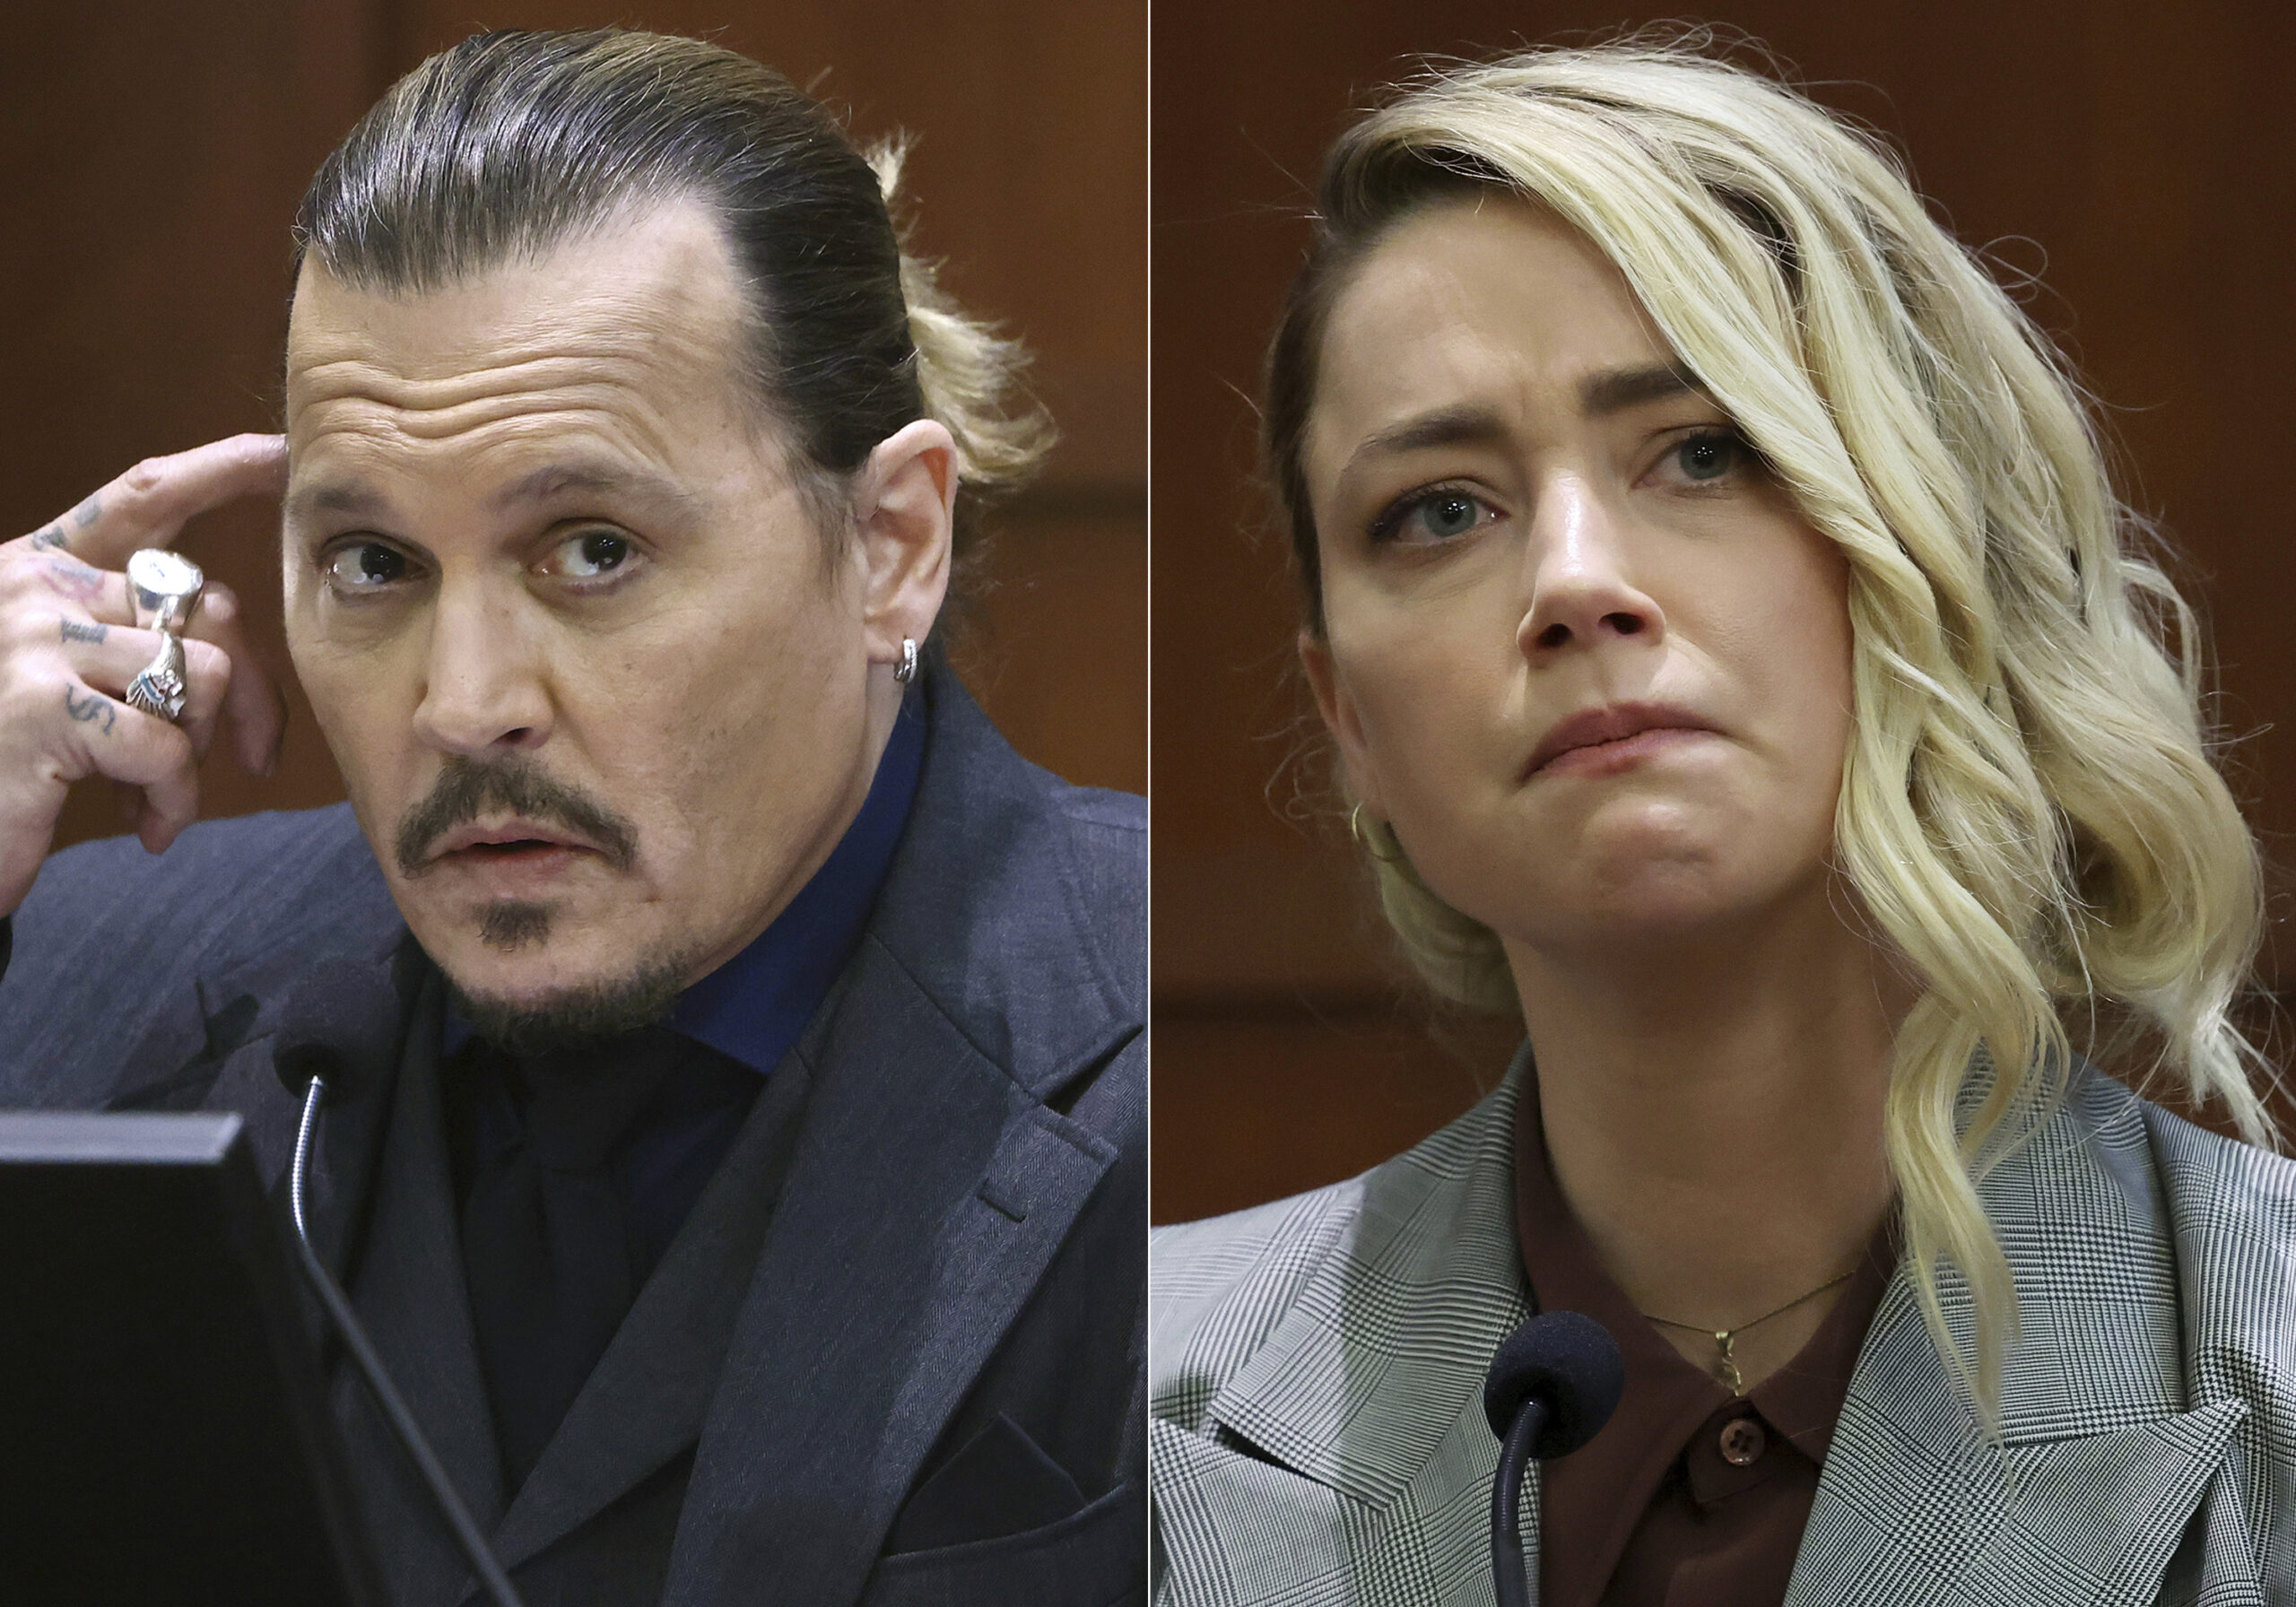 This combination of photos shows actor Johnny Depp testifying at the Fairfax County Circuit Court in Fairfax, Va., on April 21, 2022, left, and actor Amber Heard testifying in the same courtroom on May 26, 2022. The judge in the Johnny Depp-Amber Heard defamation trial made a jury's award official Friday with a written order for Heard to pay Depp $10.35 million for damaging his reputation by describing herself as a domestic abuse victim in an op-ed piece she wrote. (AP Photo)